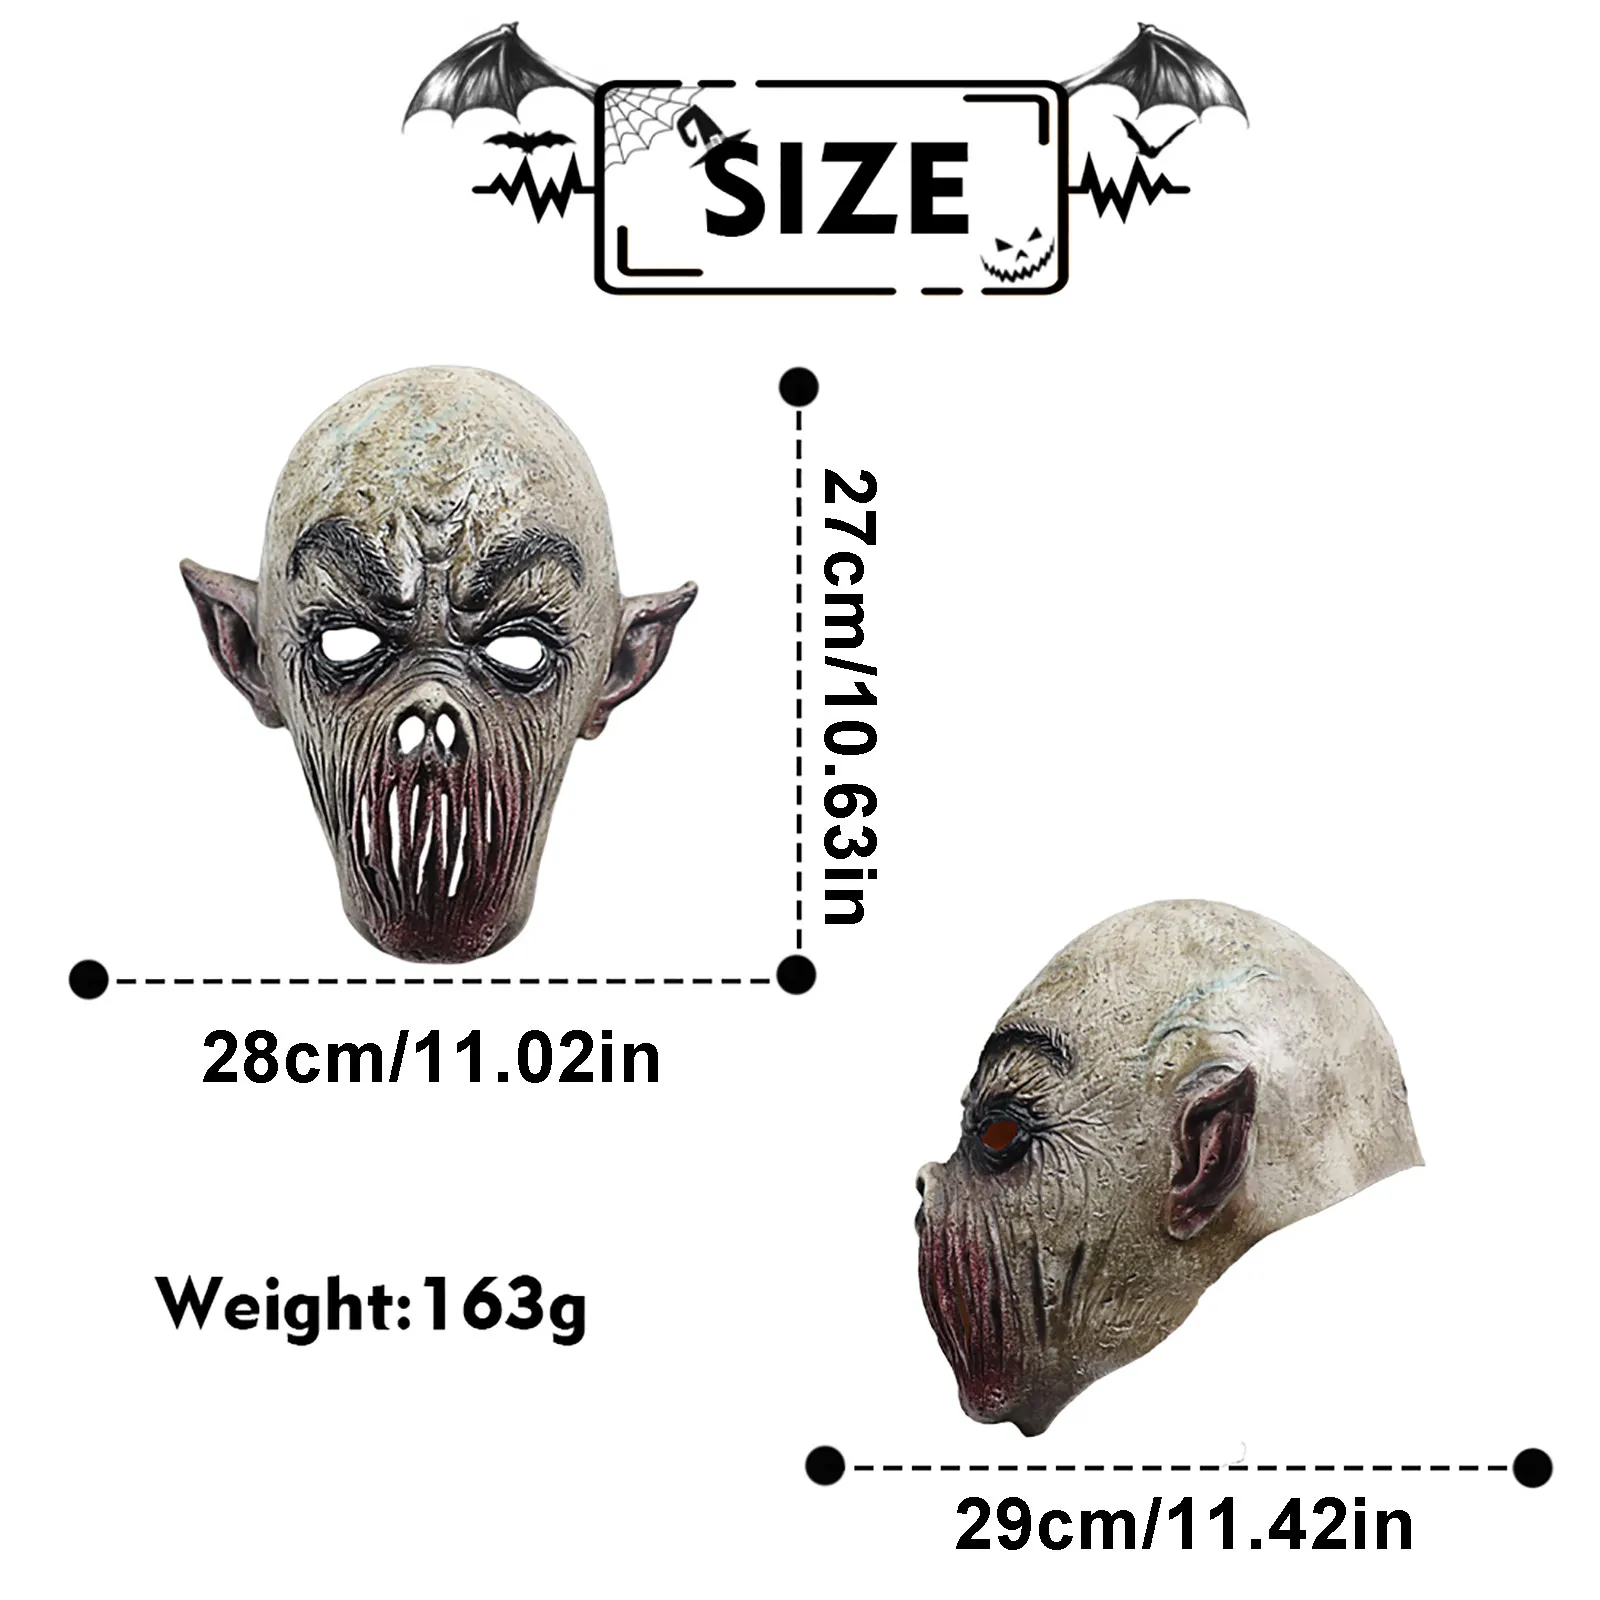 

Mouthless Mask Horror Halloween Cosplay Mask Adult Party Props Headgear Masquerade Cosplay Scary Masque Costume Prop FE